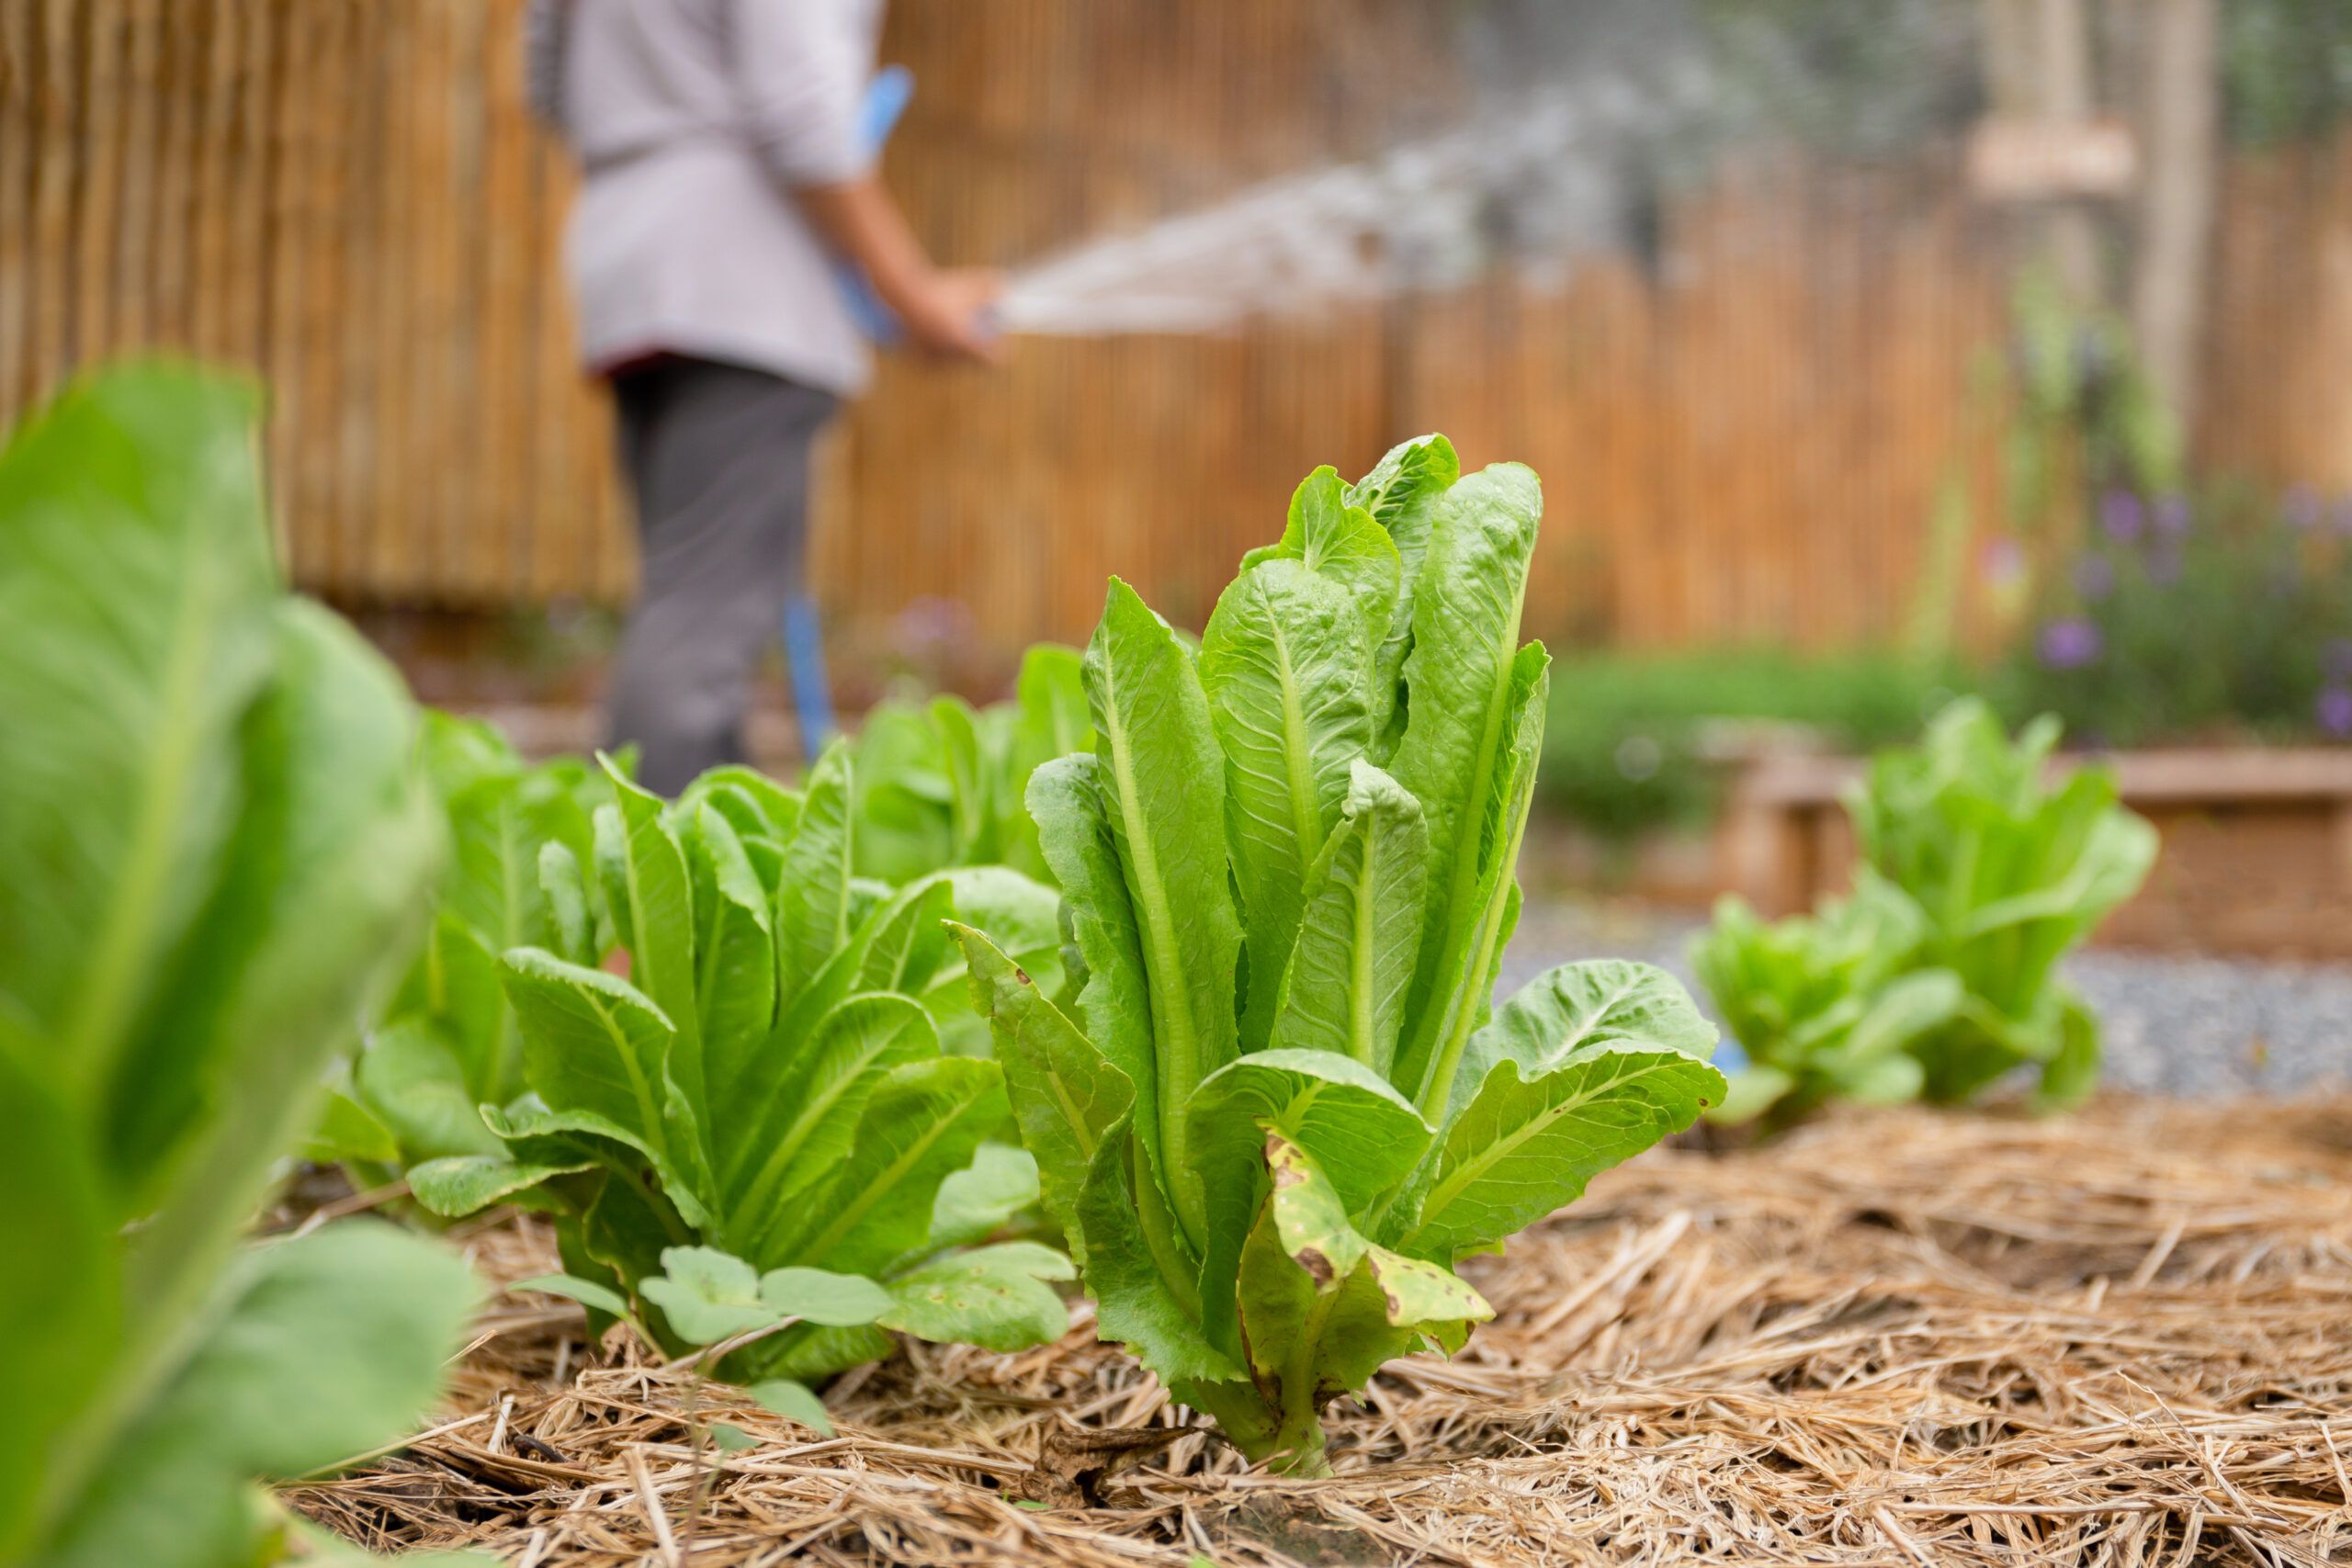 Ground view of a garden bed growing lettuce mulched with straw. A person spraying a hose in the background.